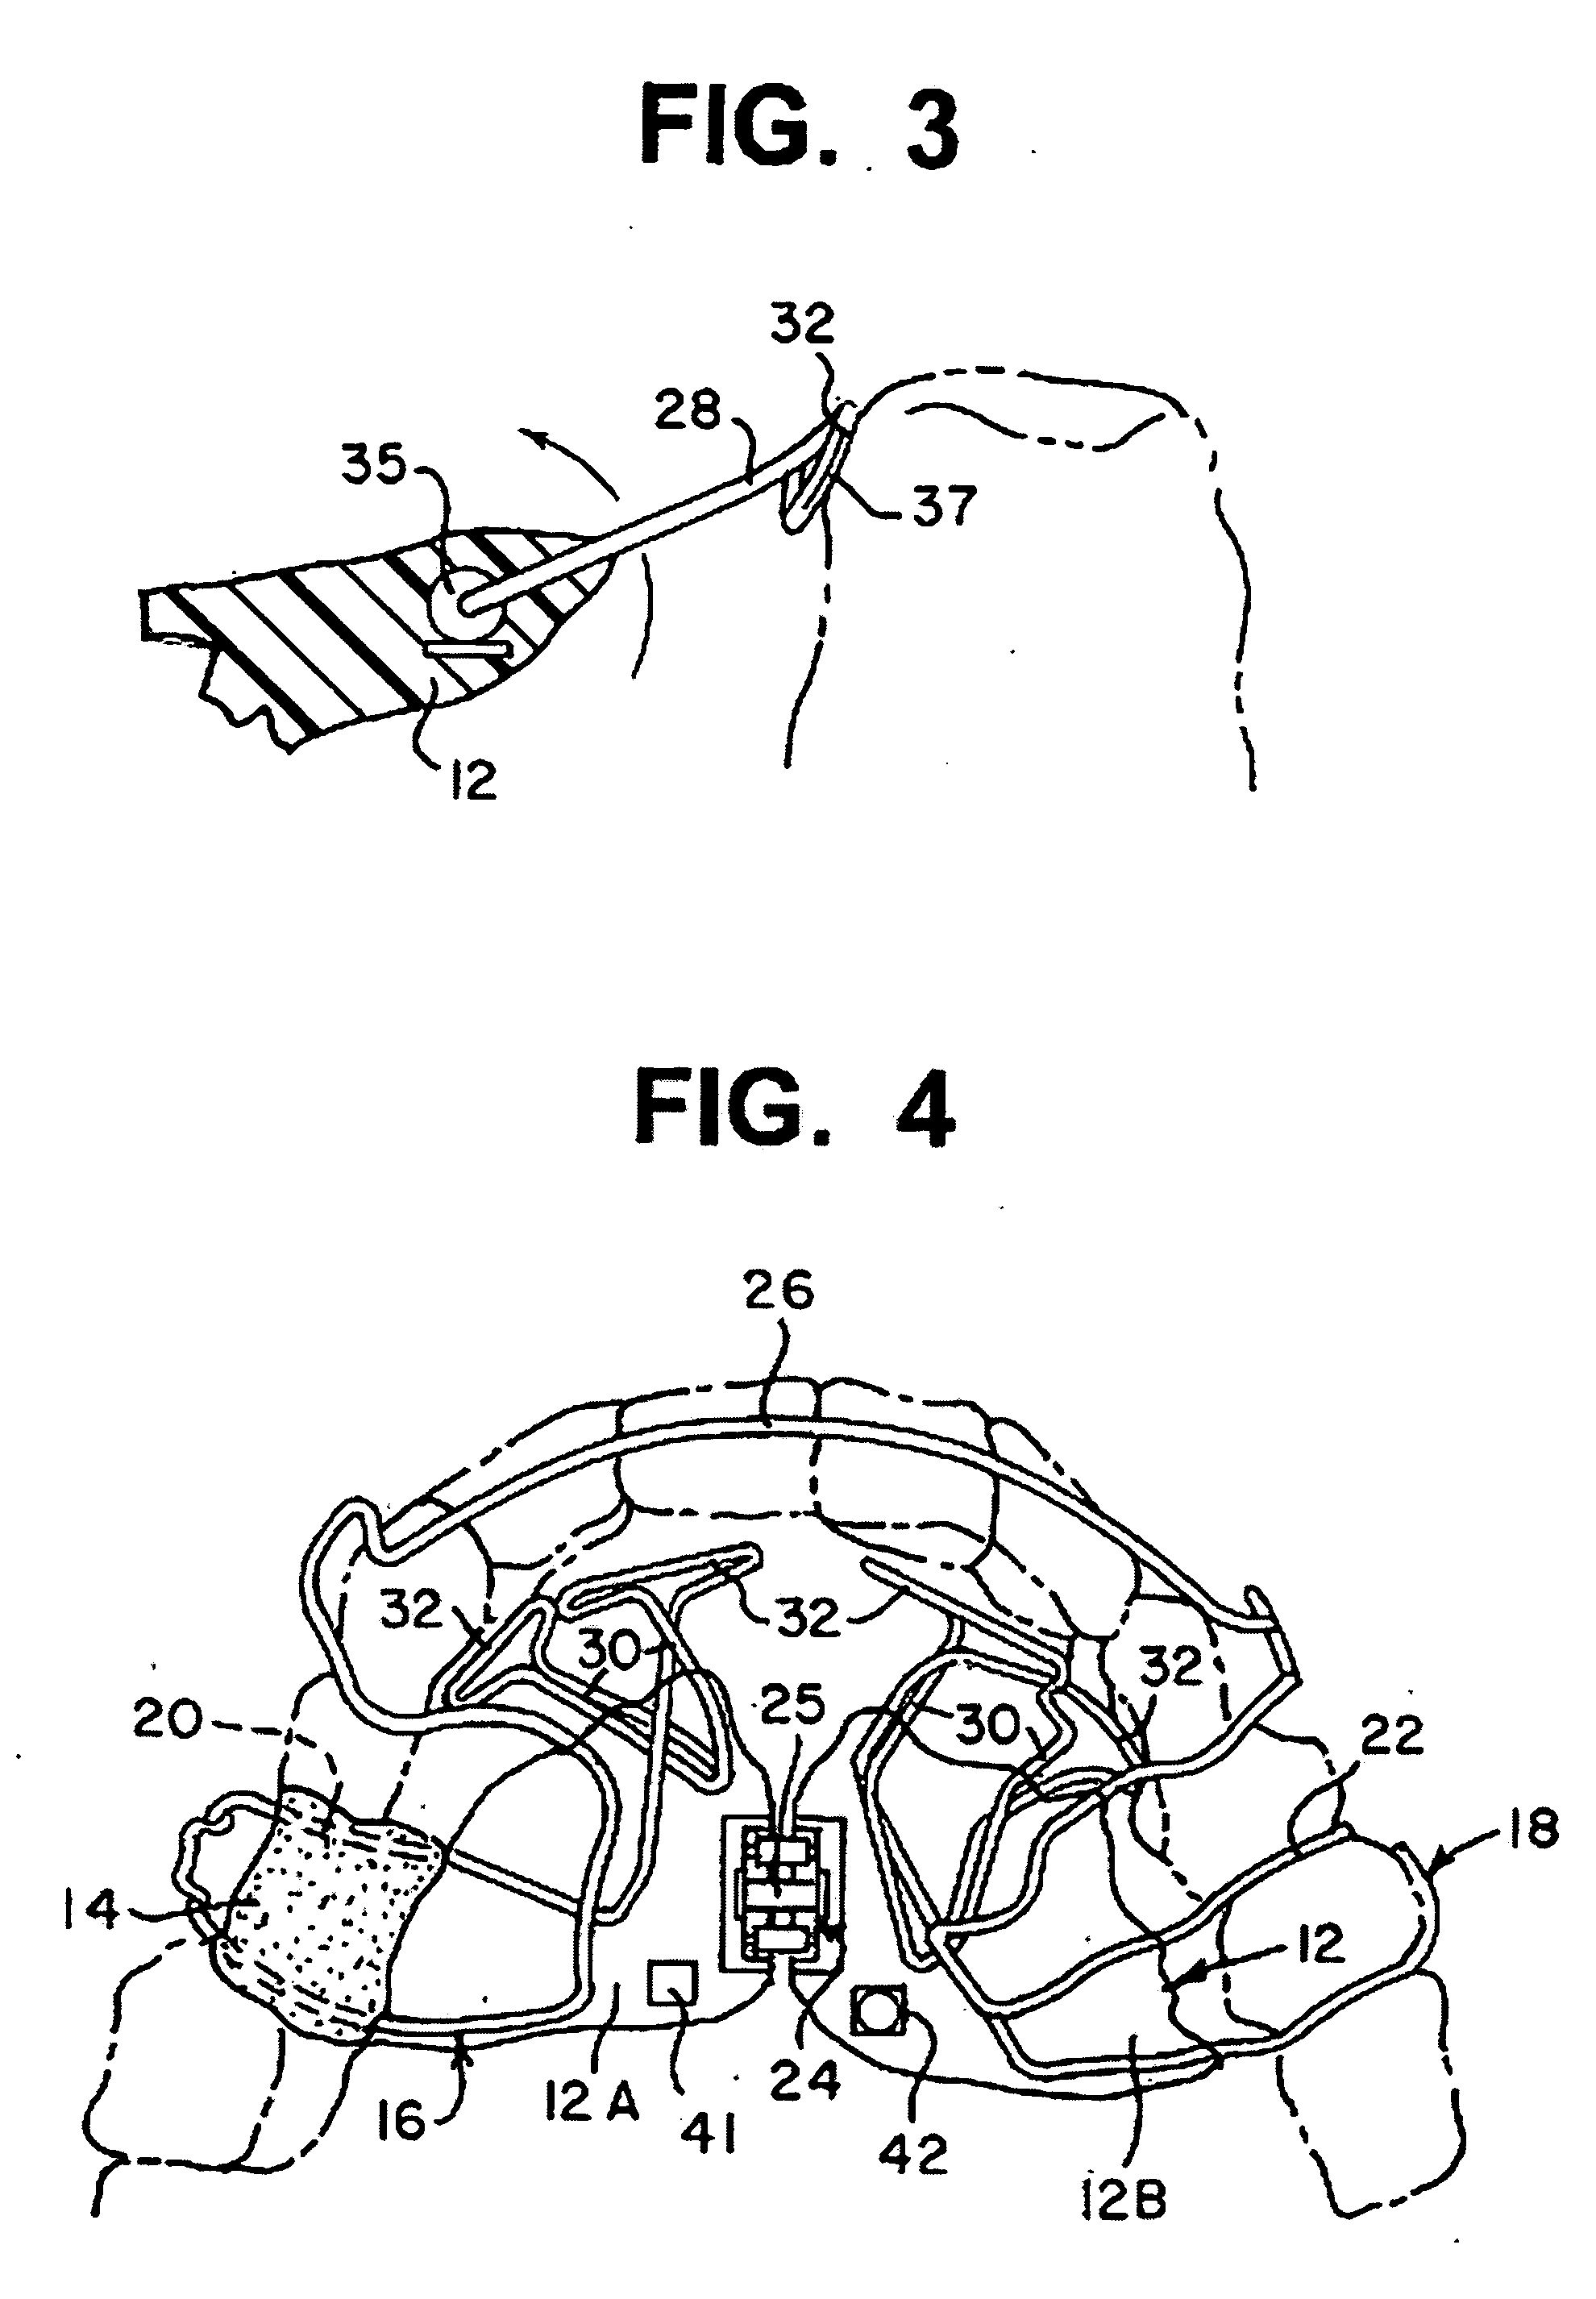 System and method to bioengineer facial form in adults